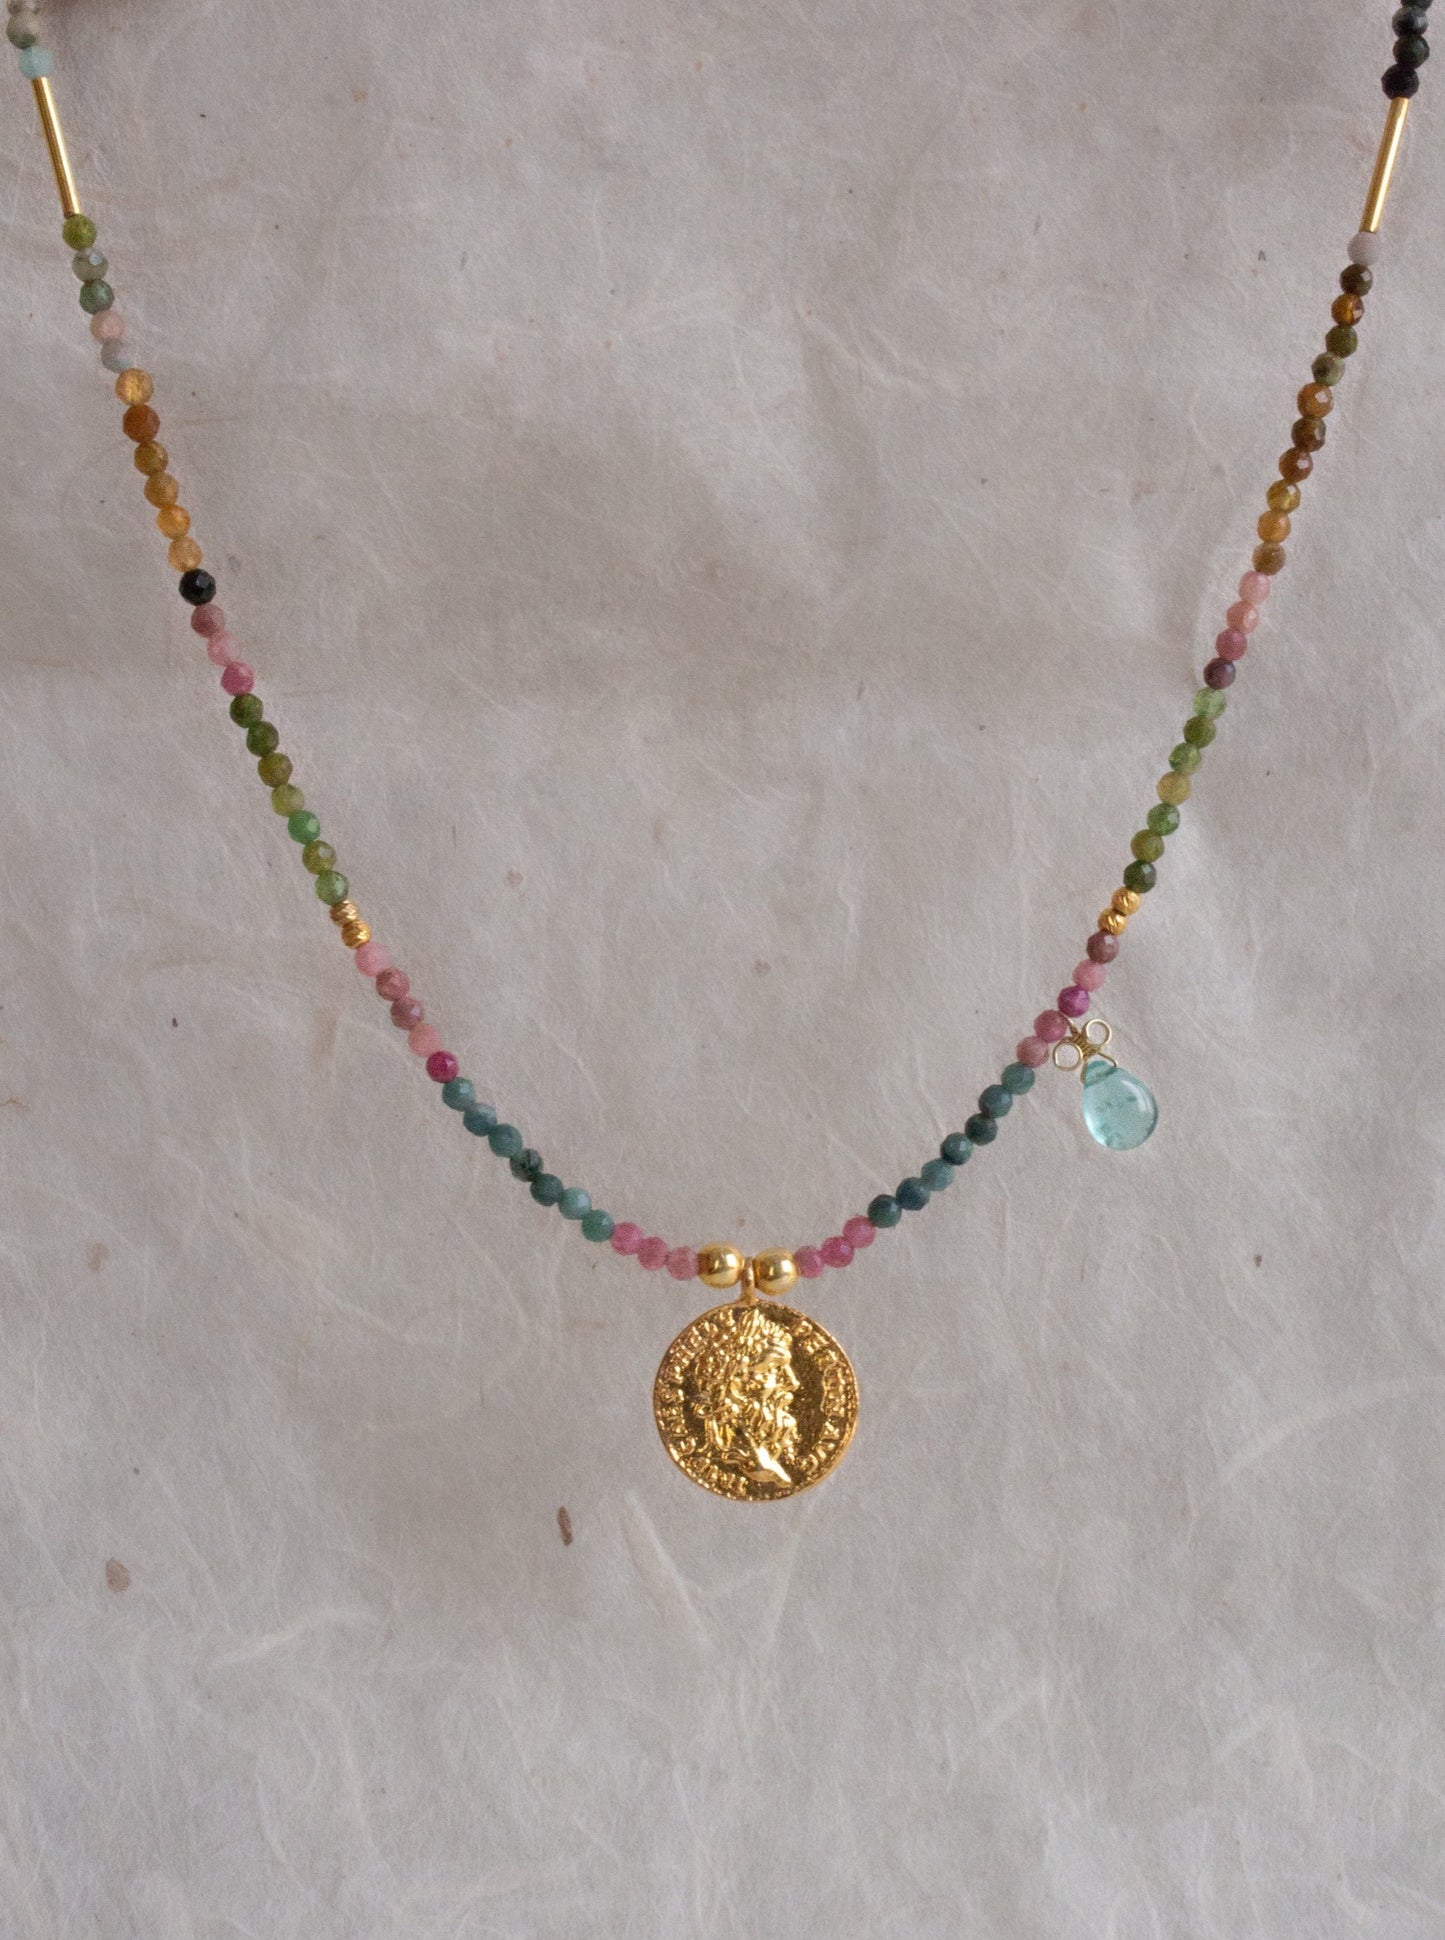 Zeus necklace with colourful tourmaline stones and a single aquamarine drop